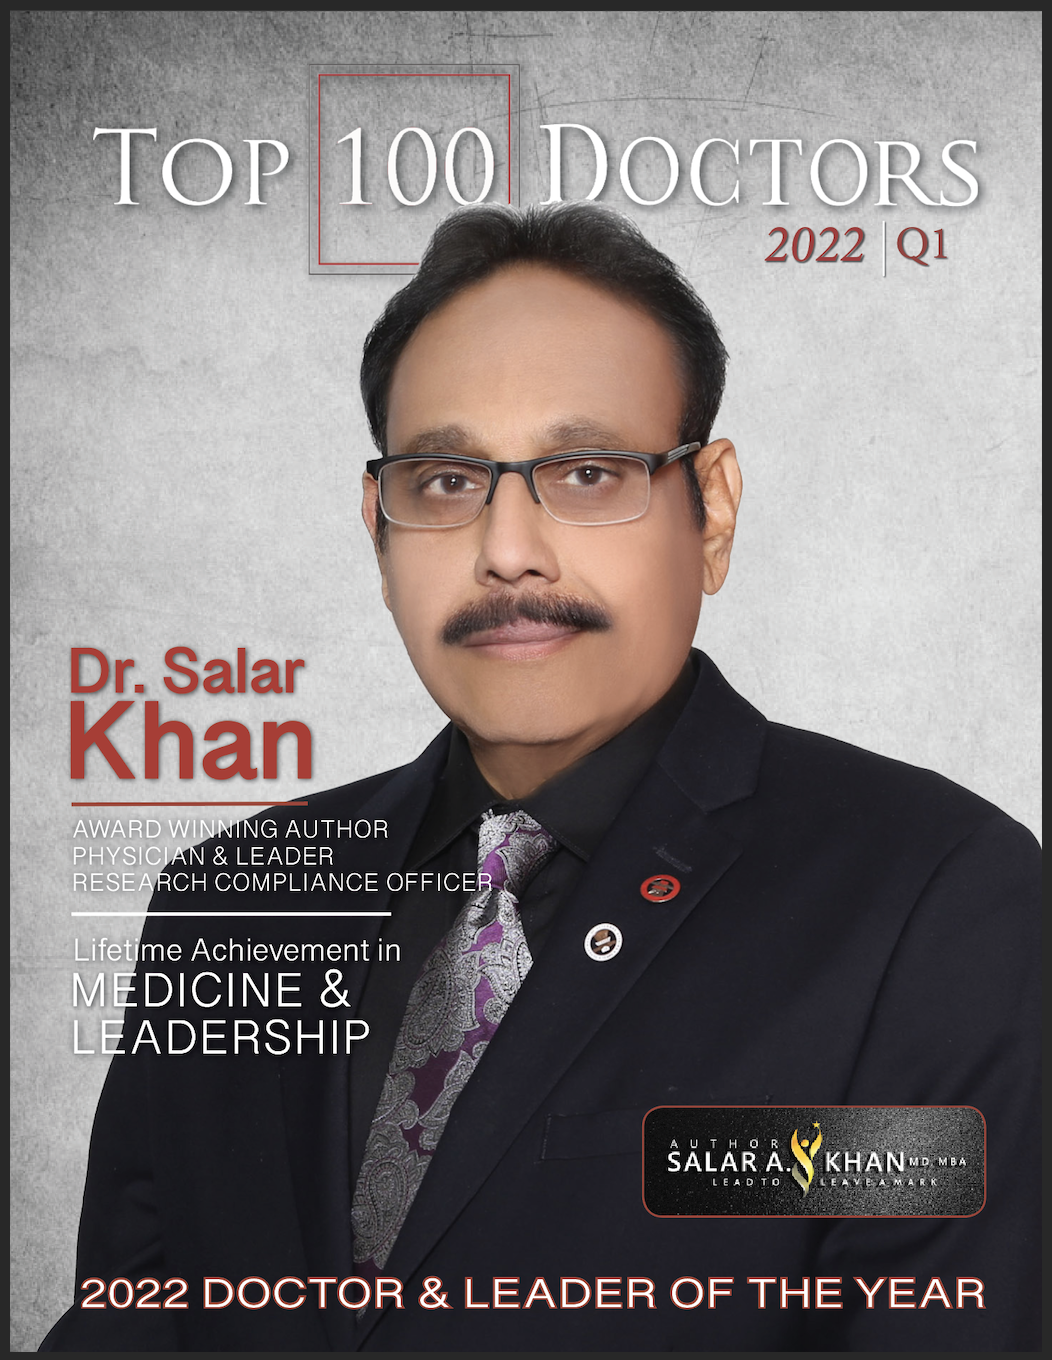 Dr. Salar Khan is Due to be Featured on the Front Cover of 2022 Top 100 Doctors Magazine's Q1 Edition